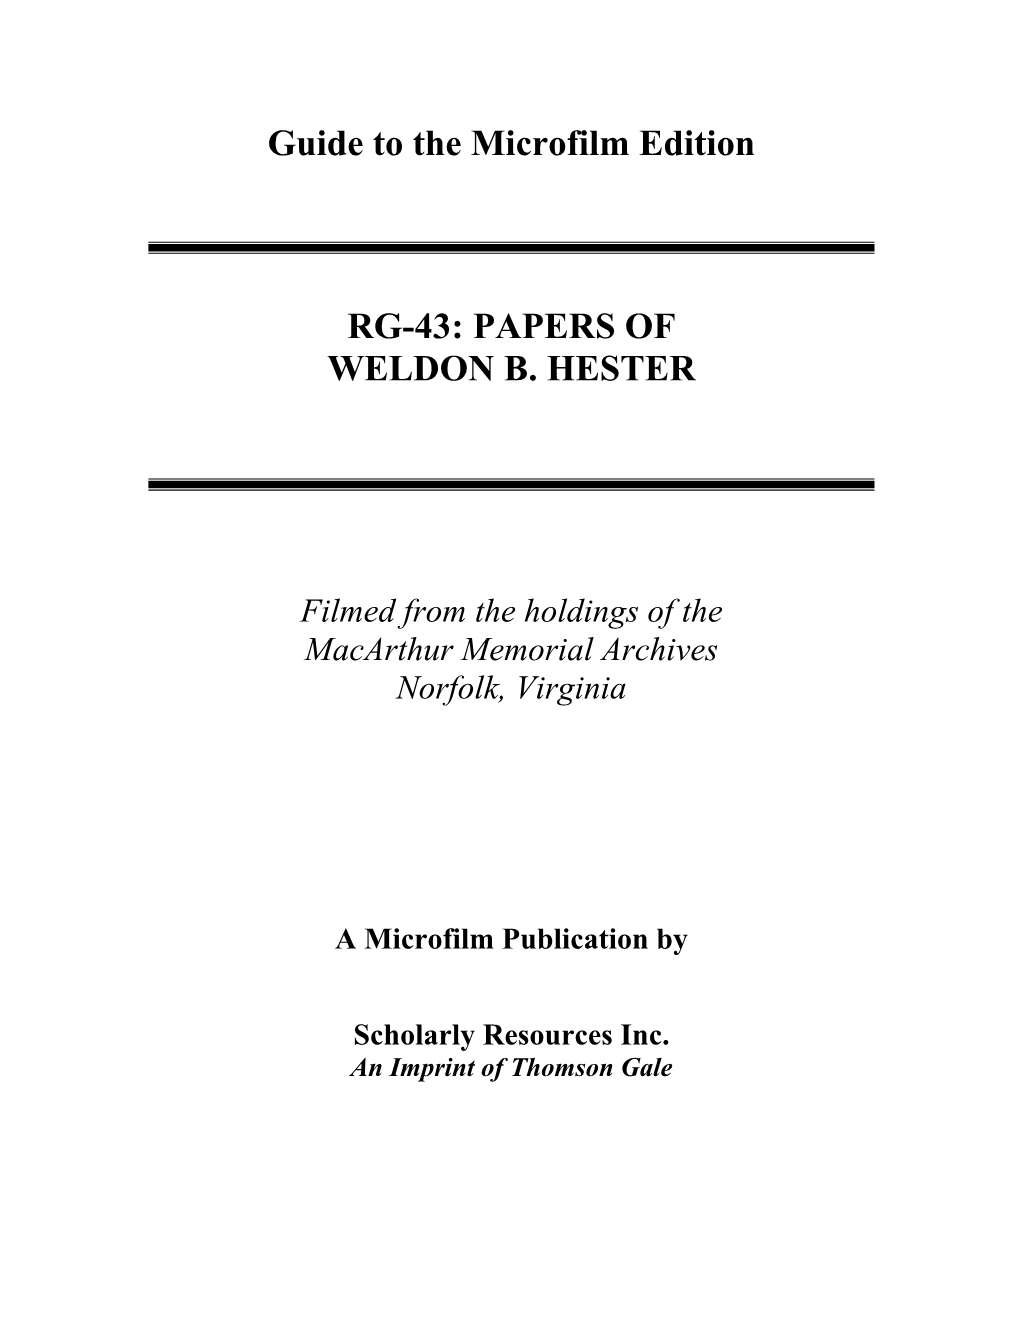 Guide to the Microfilm Edition RG-43: PAPERS of WELDON B. HESTER